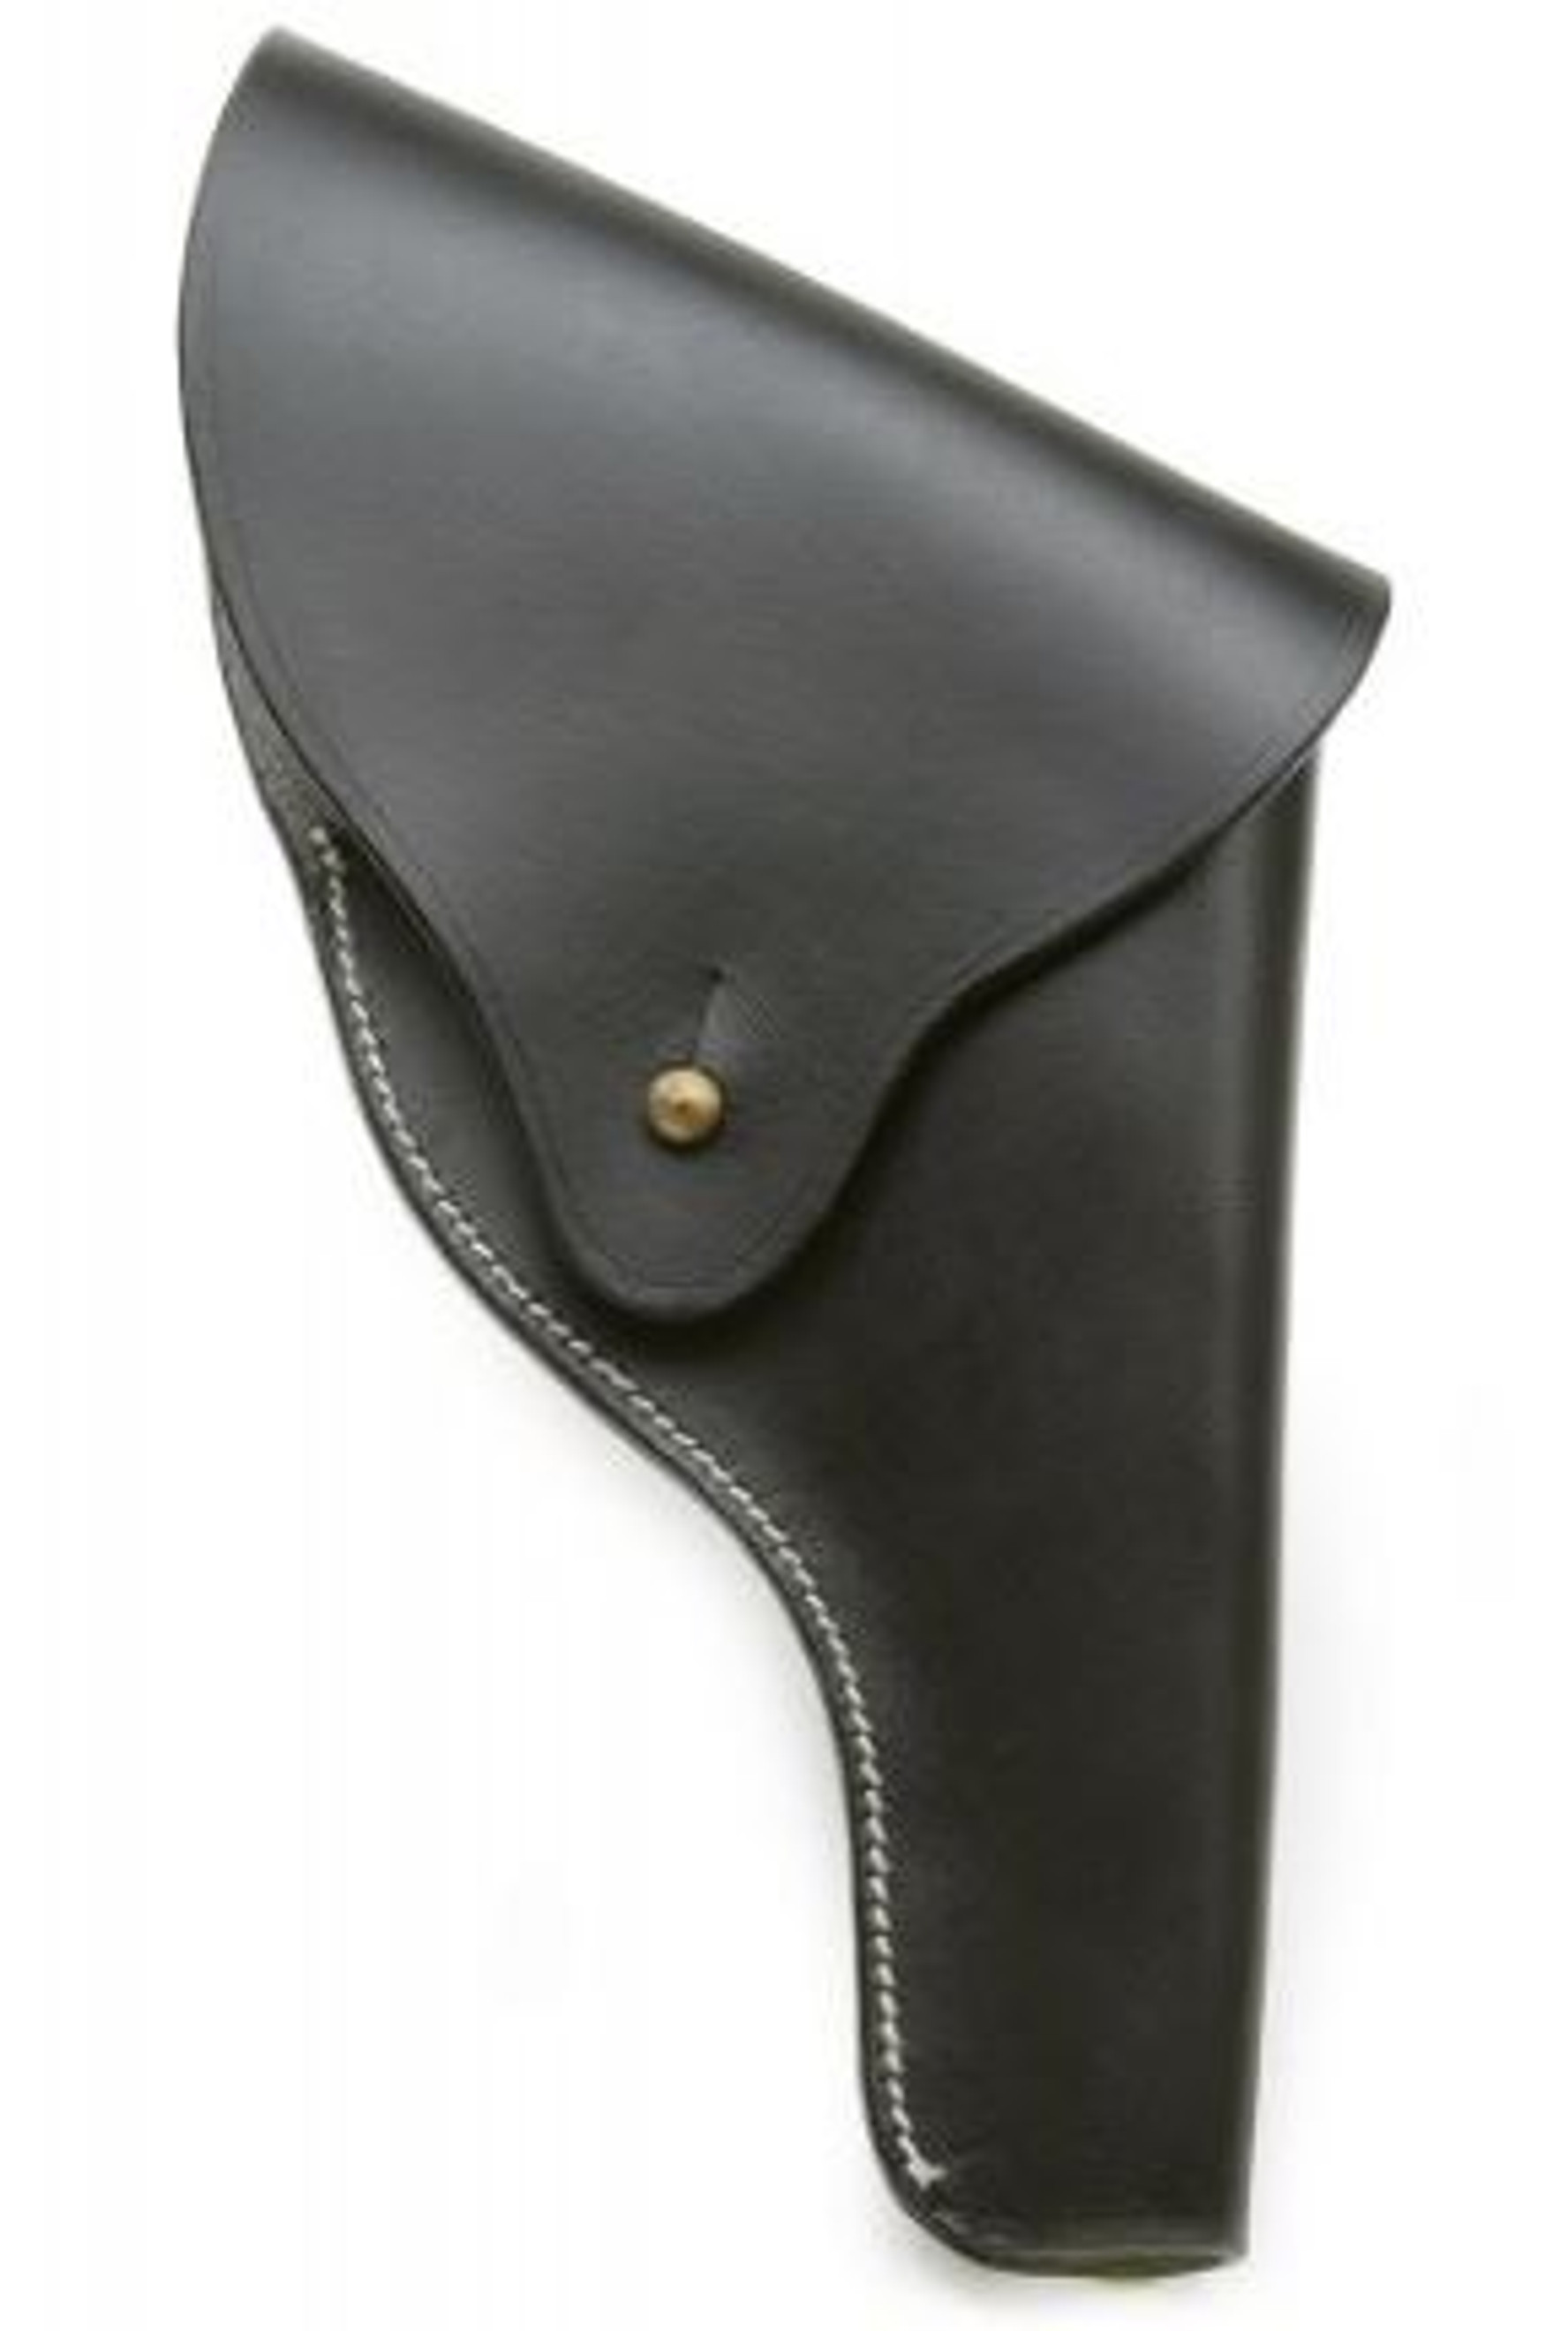 US Smith & Wesson Victory Model Revolver Holster Full Flap in Black Leather .38 Special Model 10